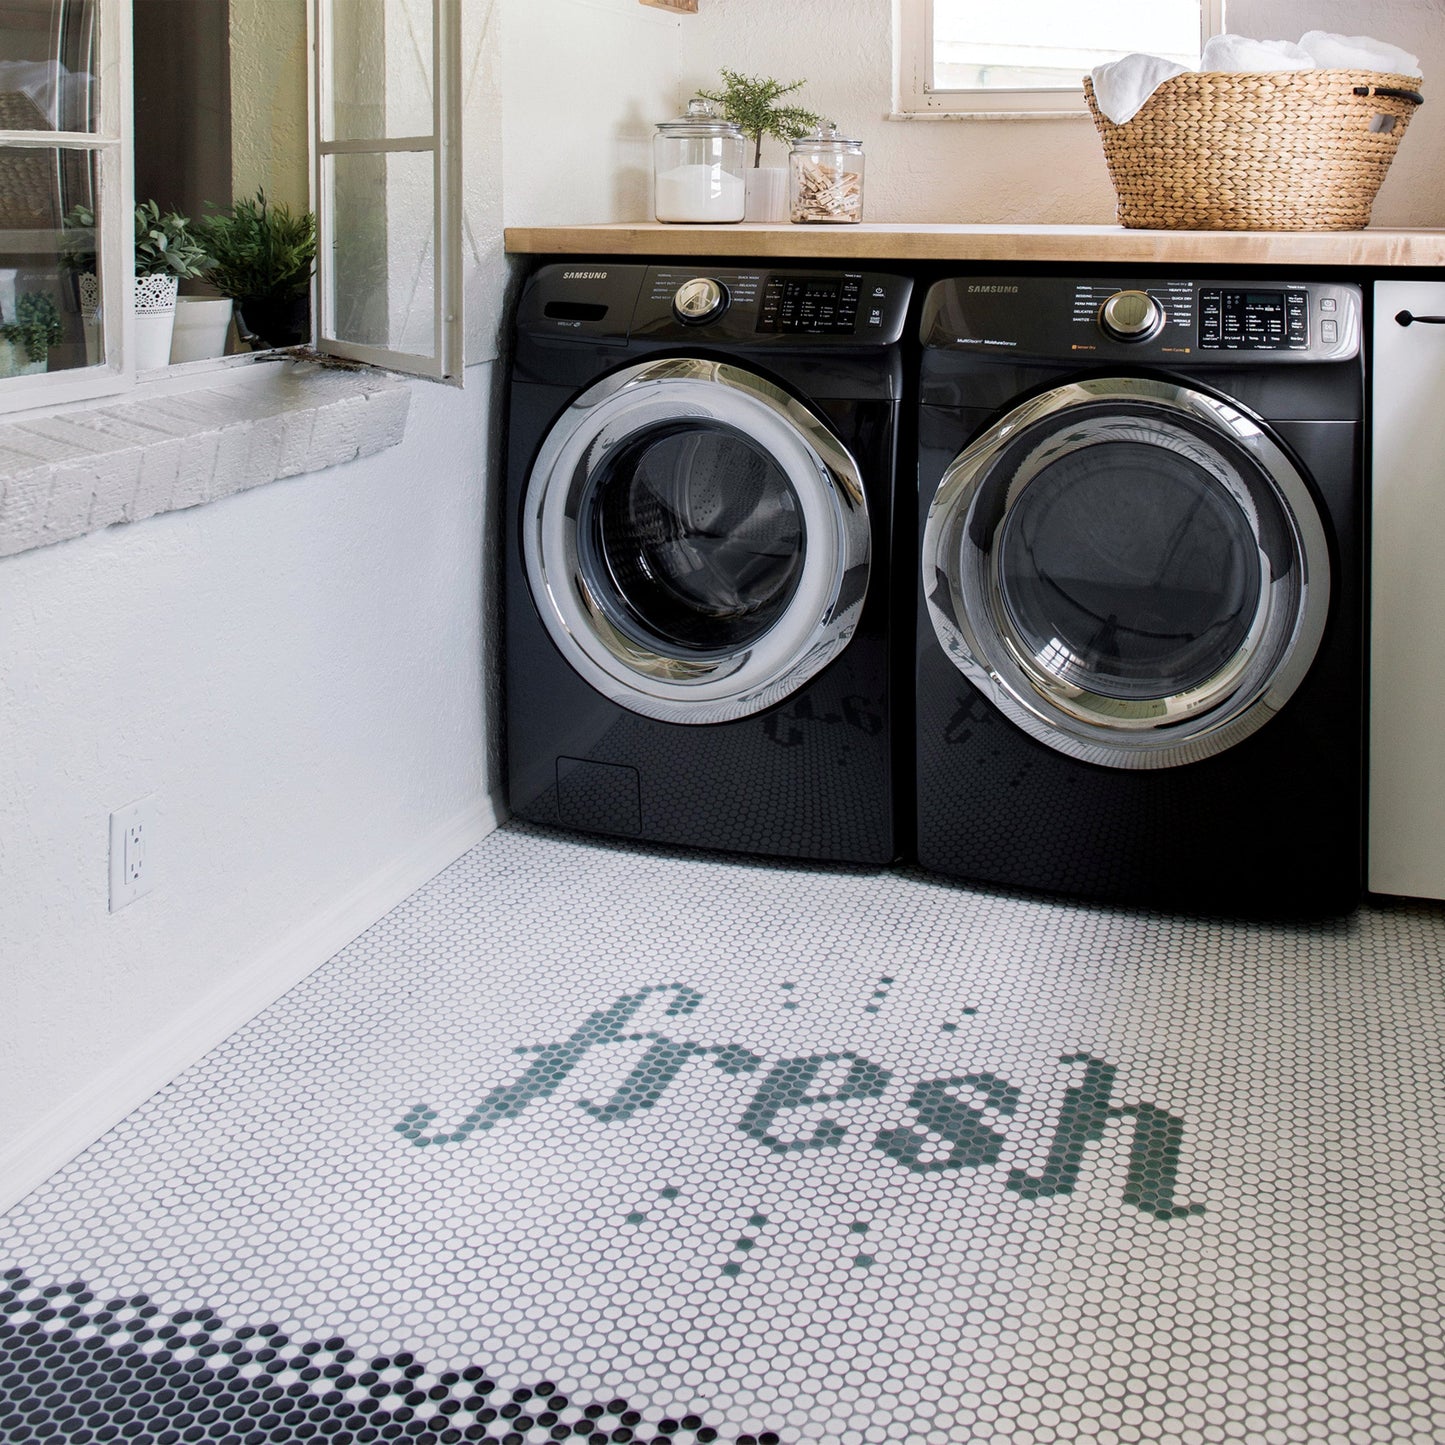 Washer and dryer in laundry room. Multiple penny mosaic tile in various colors spell out "Fresh" on the floor.